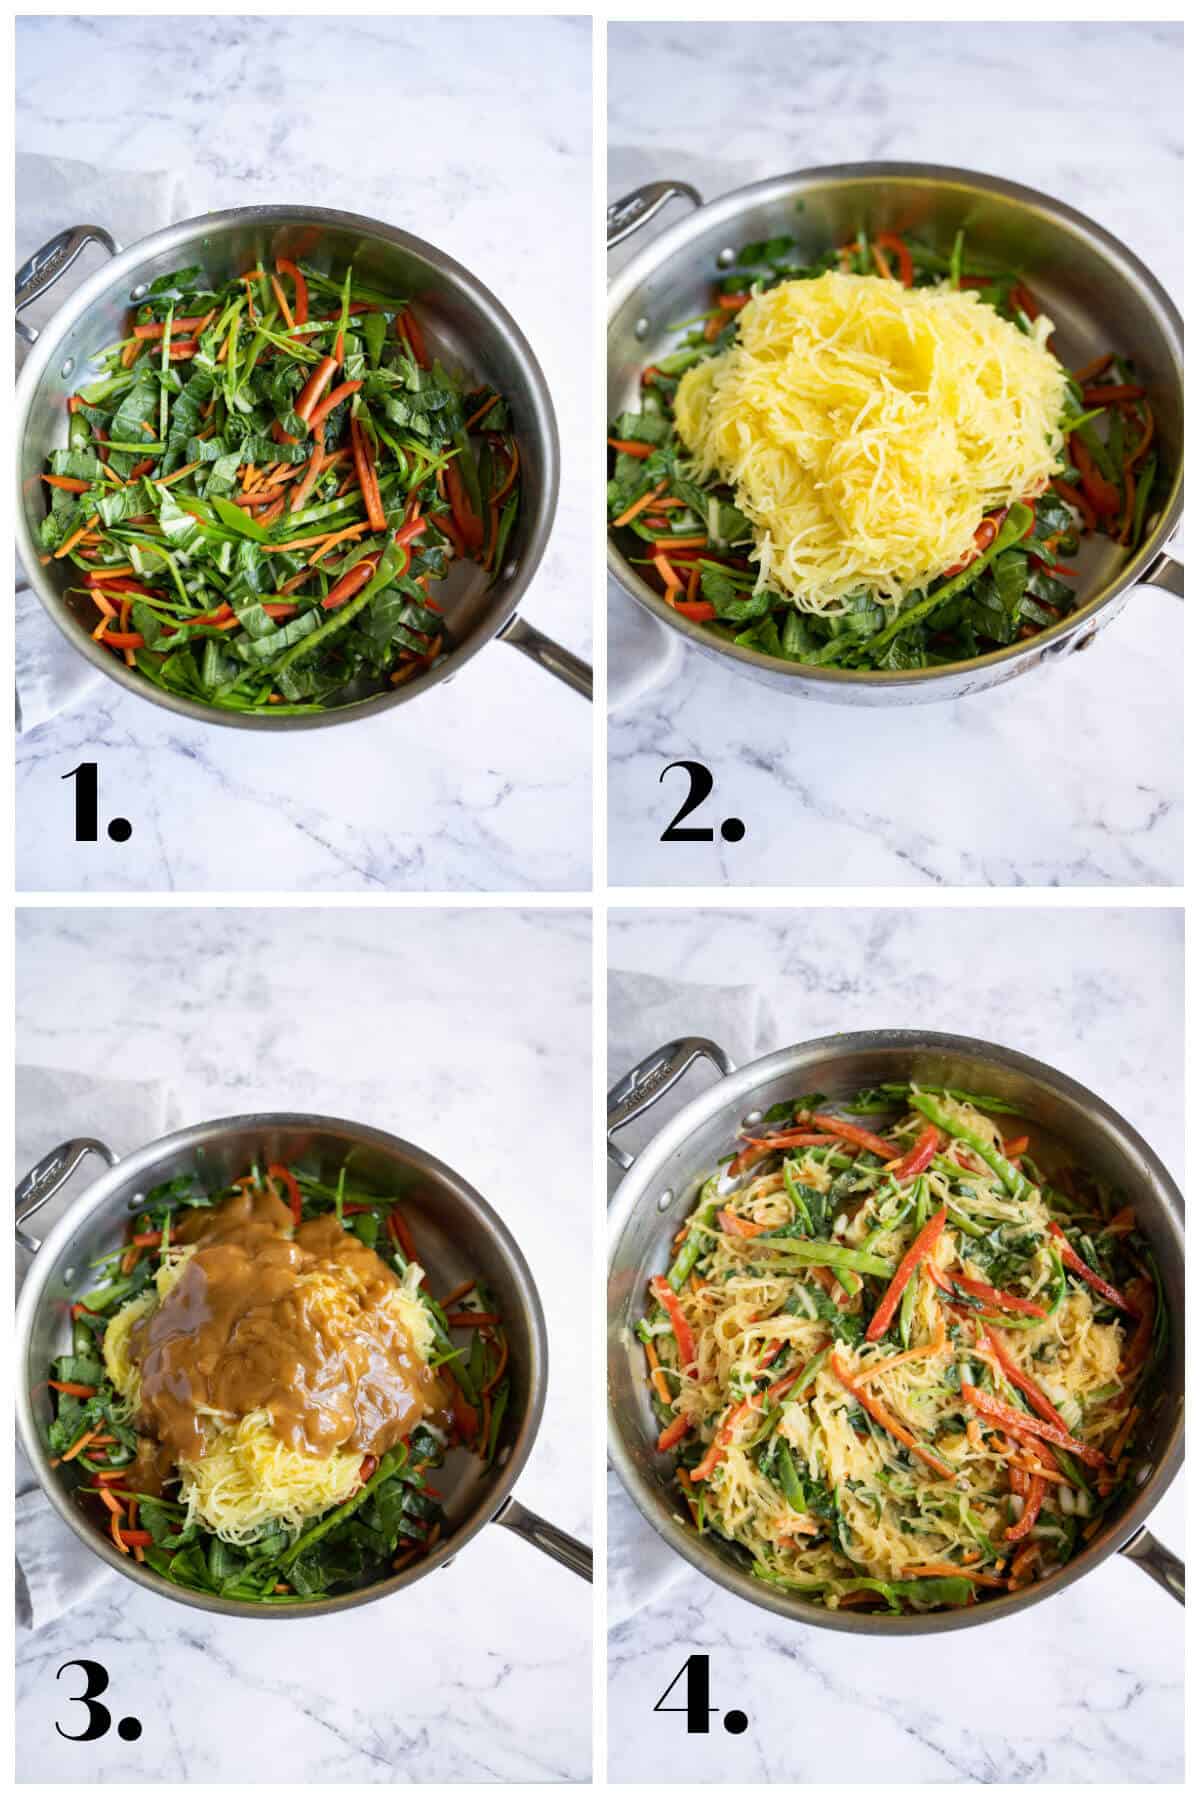 4 picture collage describing the steps to making asian spaghetti squash. 1. saute' vegetables; 2. add spaghetti squash noodles; 3. add sauce; 4. toss to coat.